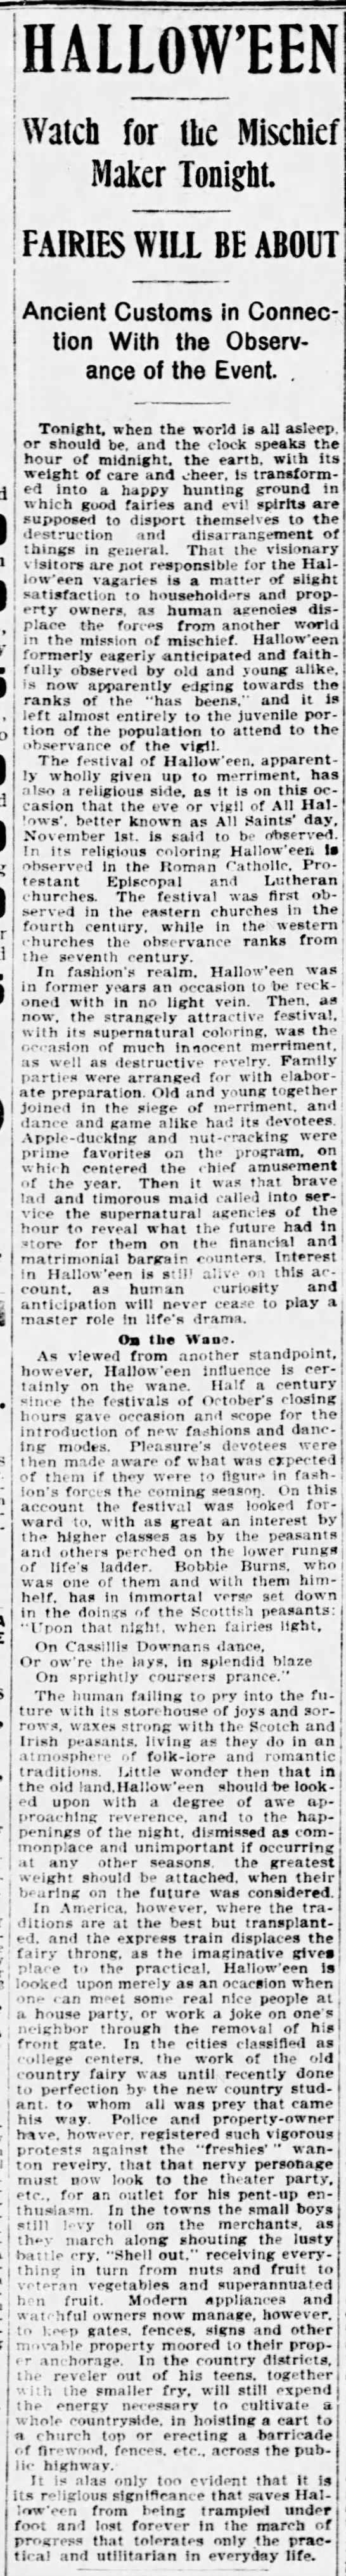 Halloween and "Shell out!" (1899). - 